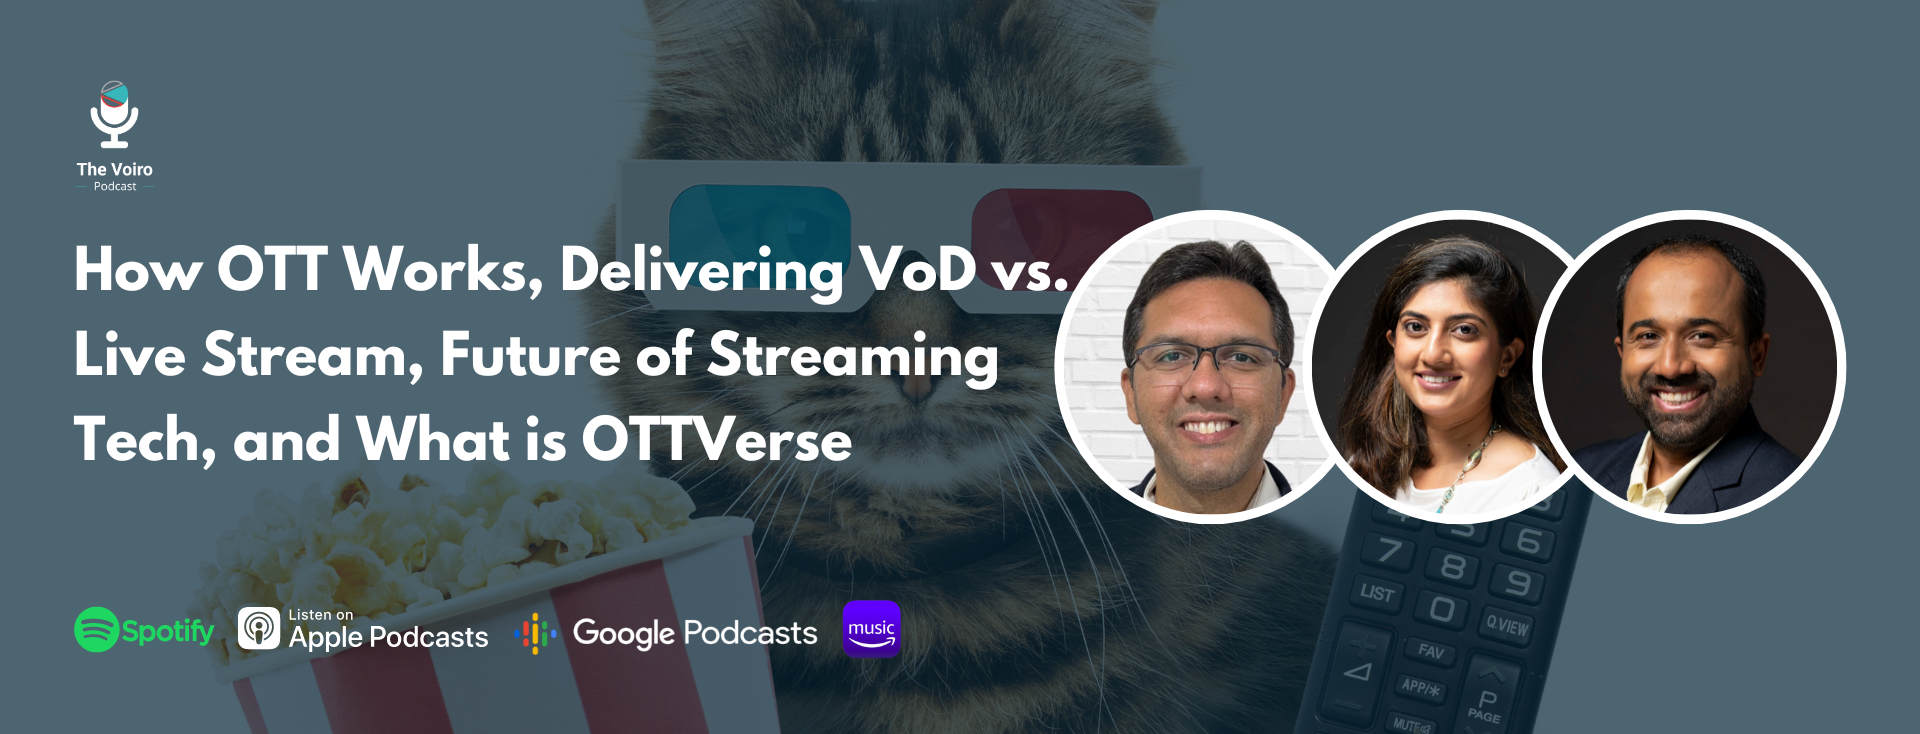 How OTT Works, Delivering VoD vs. Live Stream, Future of Streaming Tech, and What is OTTVerse